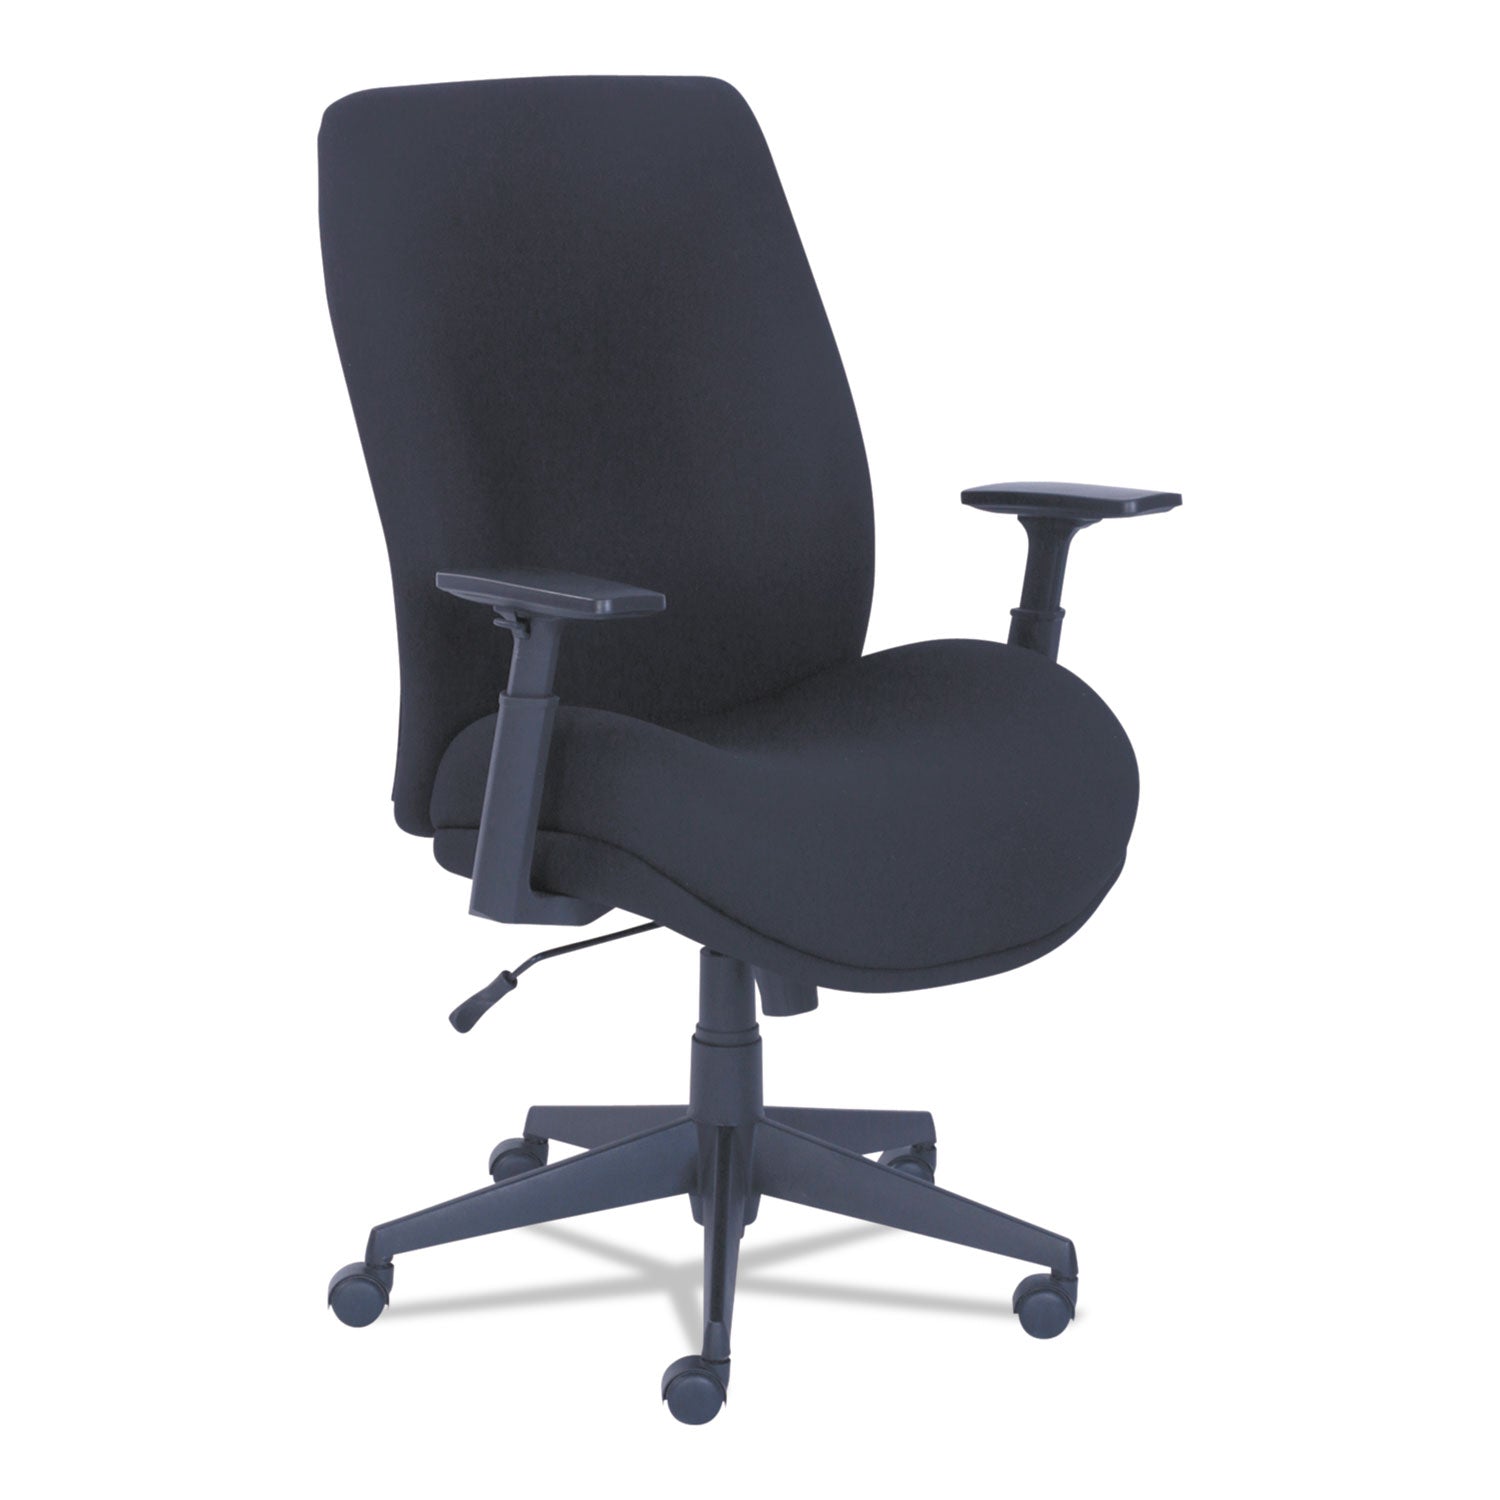 baldwyn-series-mid-back-task-chair-supports-up-to-275-lb-19-to-22-seat-height-black_lzb48825 - 1